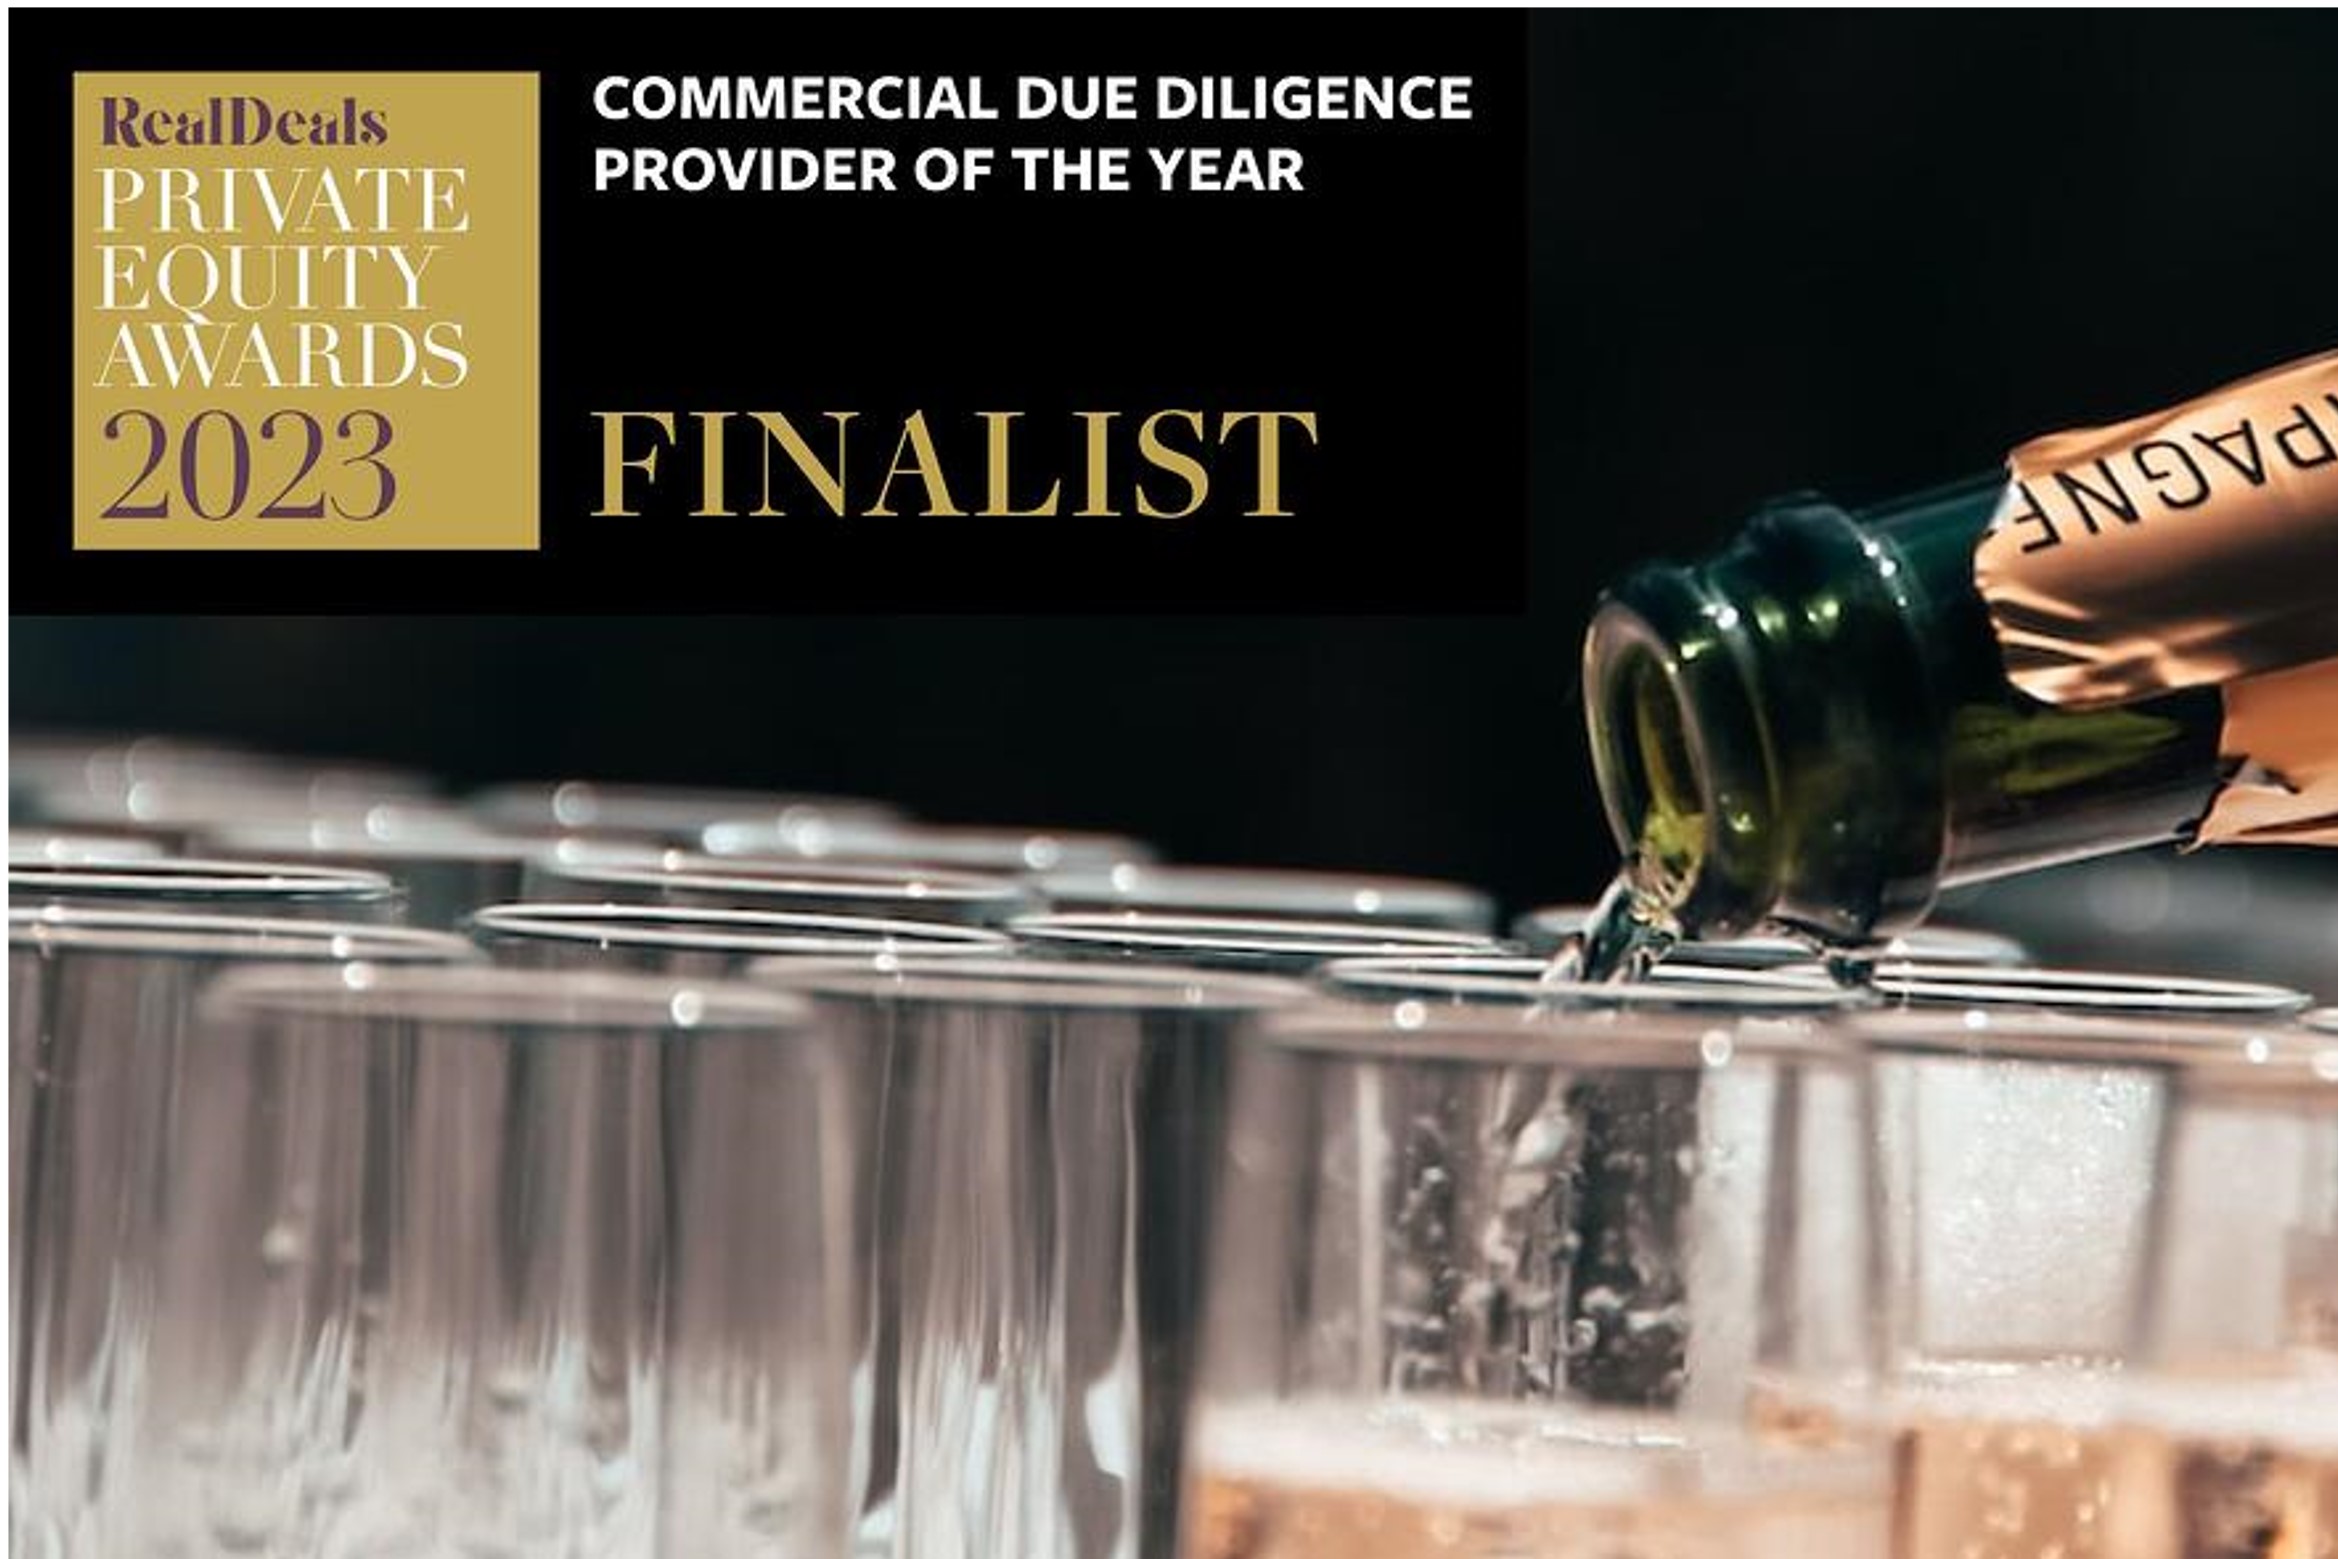 Luminii shortlisted as Commercial Due Diligence Provider of the Year at the Real Deals Private Equity Awards 2023